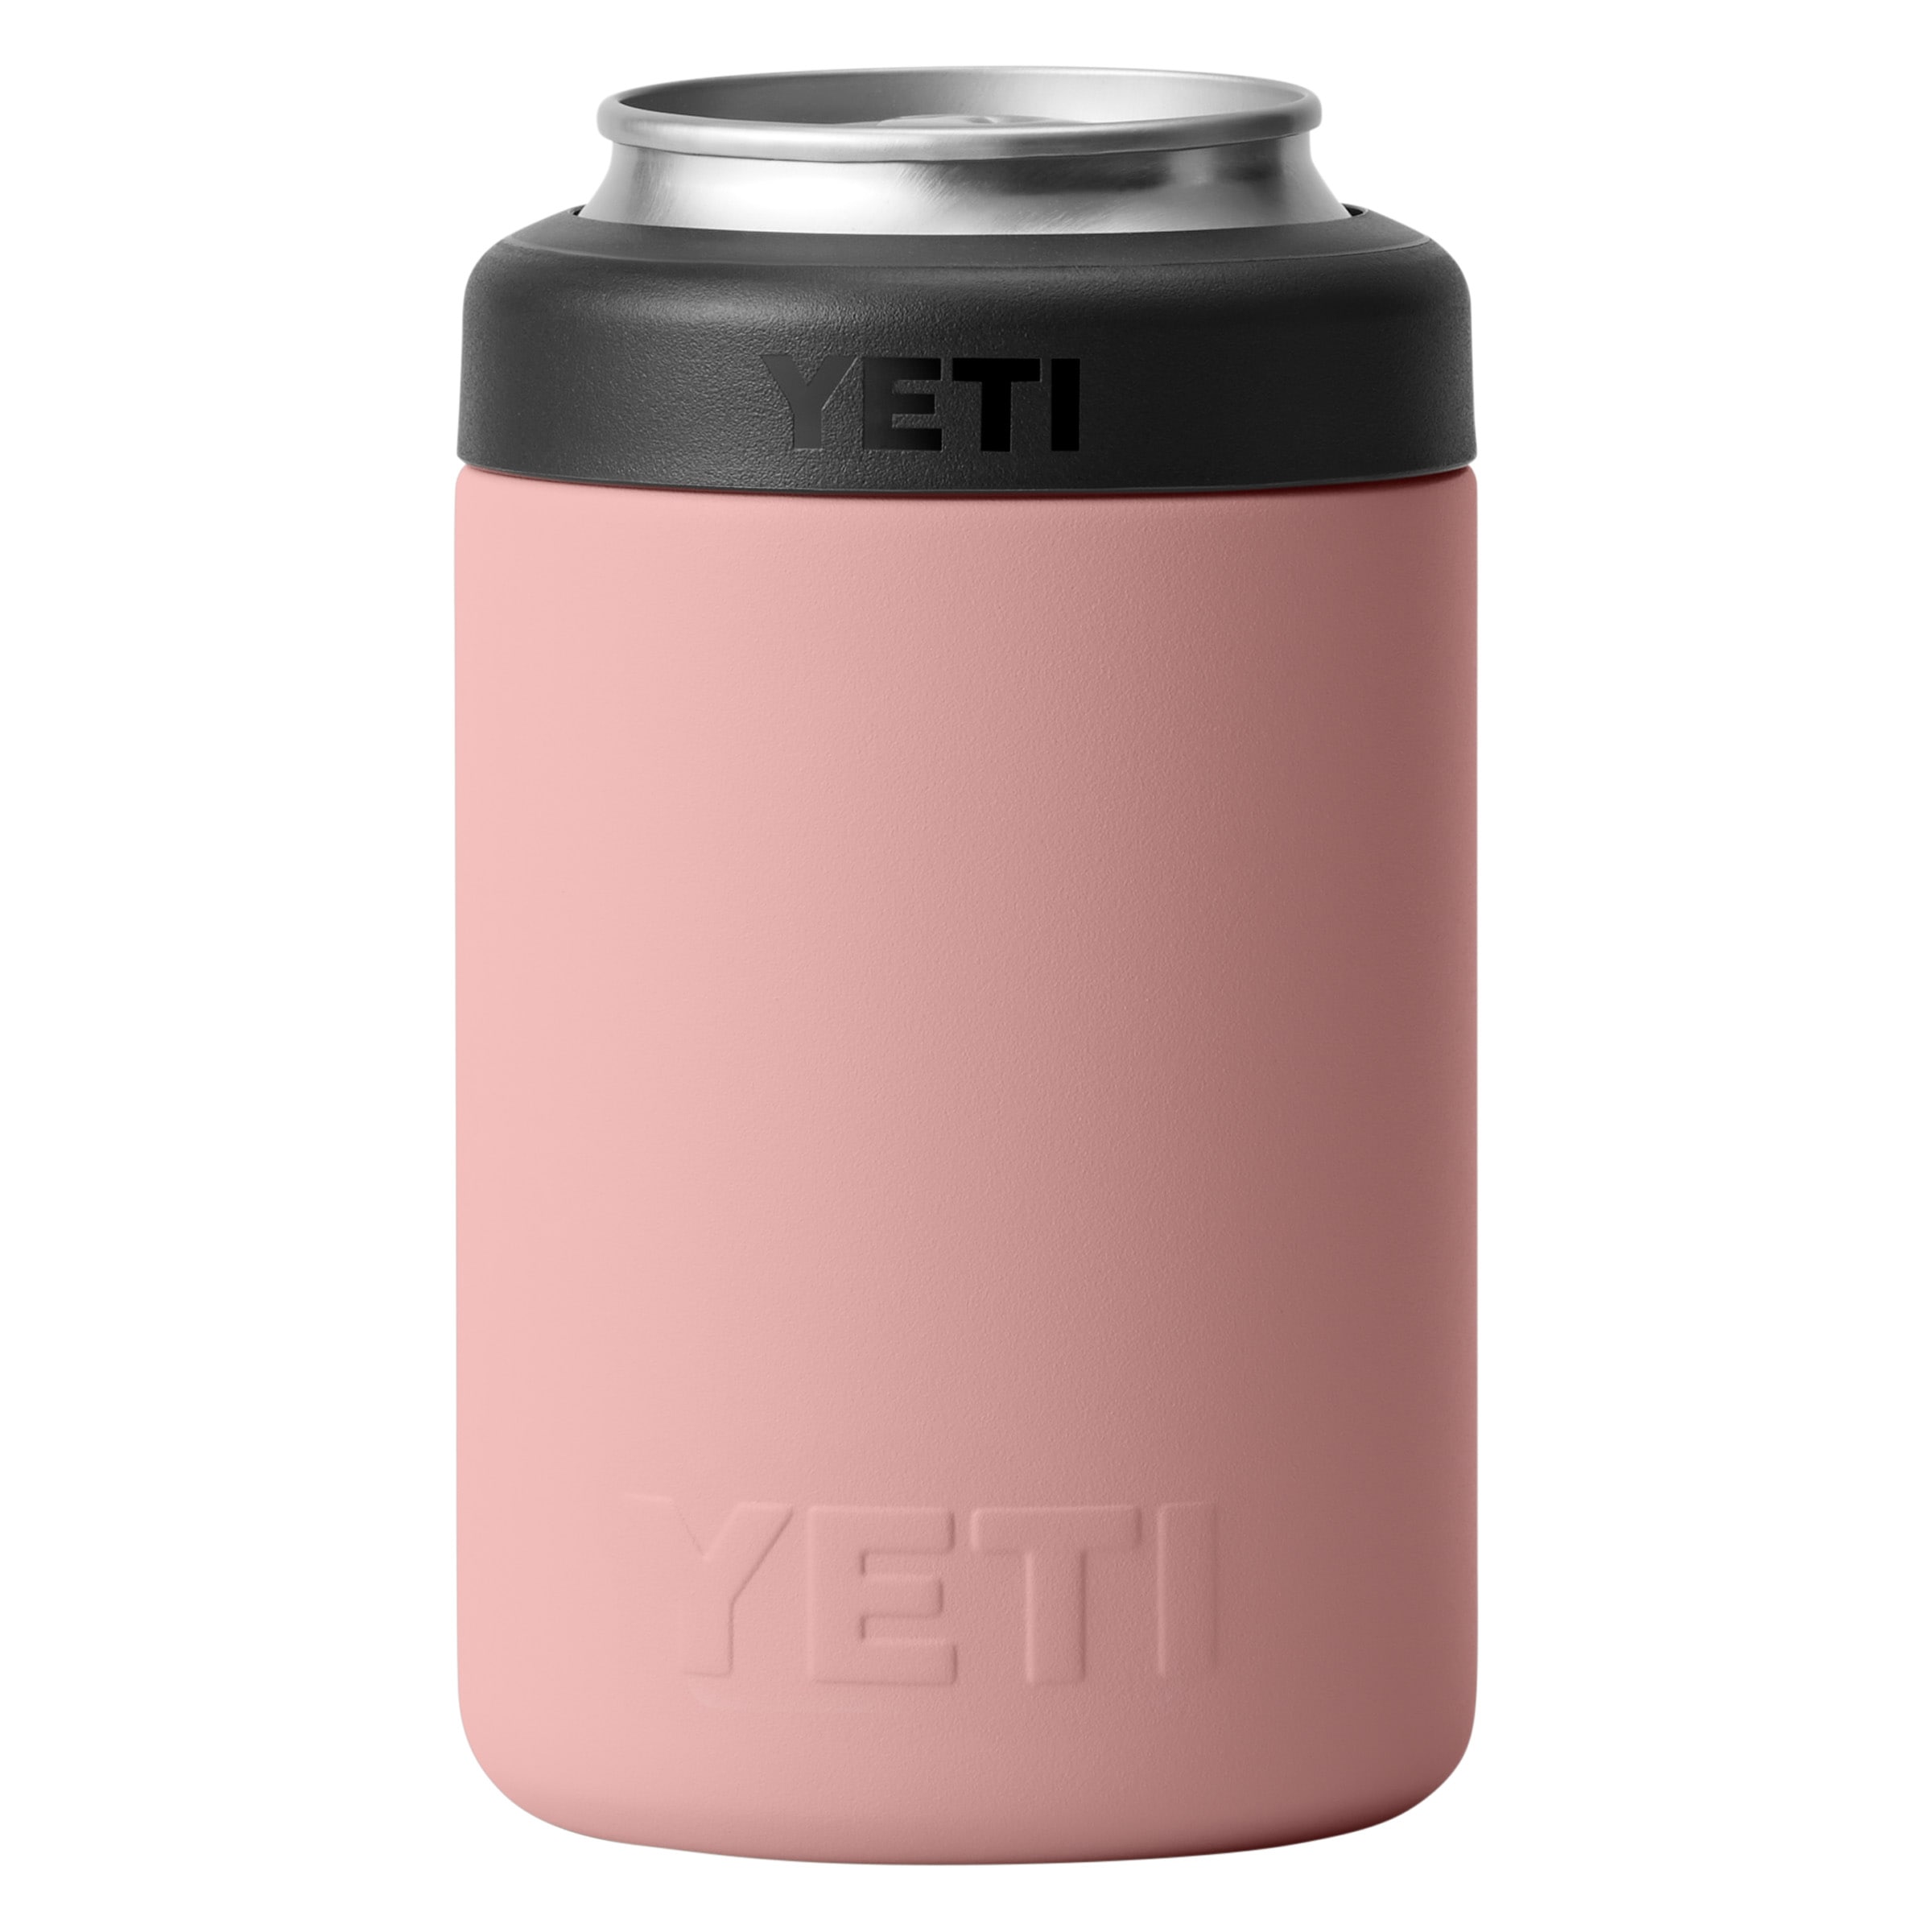 Horizon Leisure - New Yeti Sandstone Pink launches today! Get in early for  Christmas as it won't last long.. Not pictured here is the wine tumbler  which is also available in the